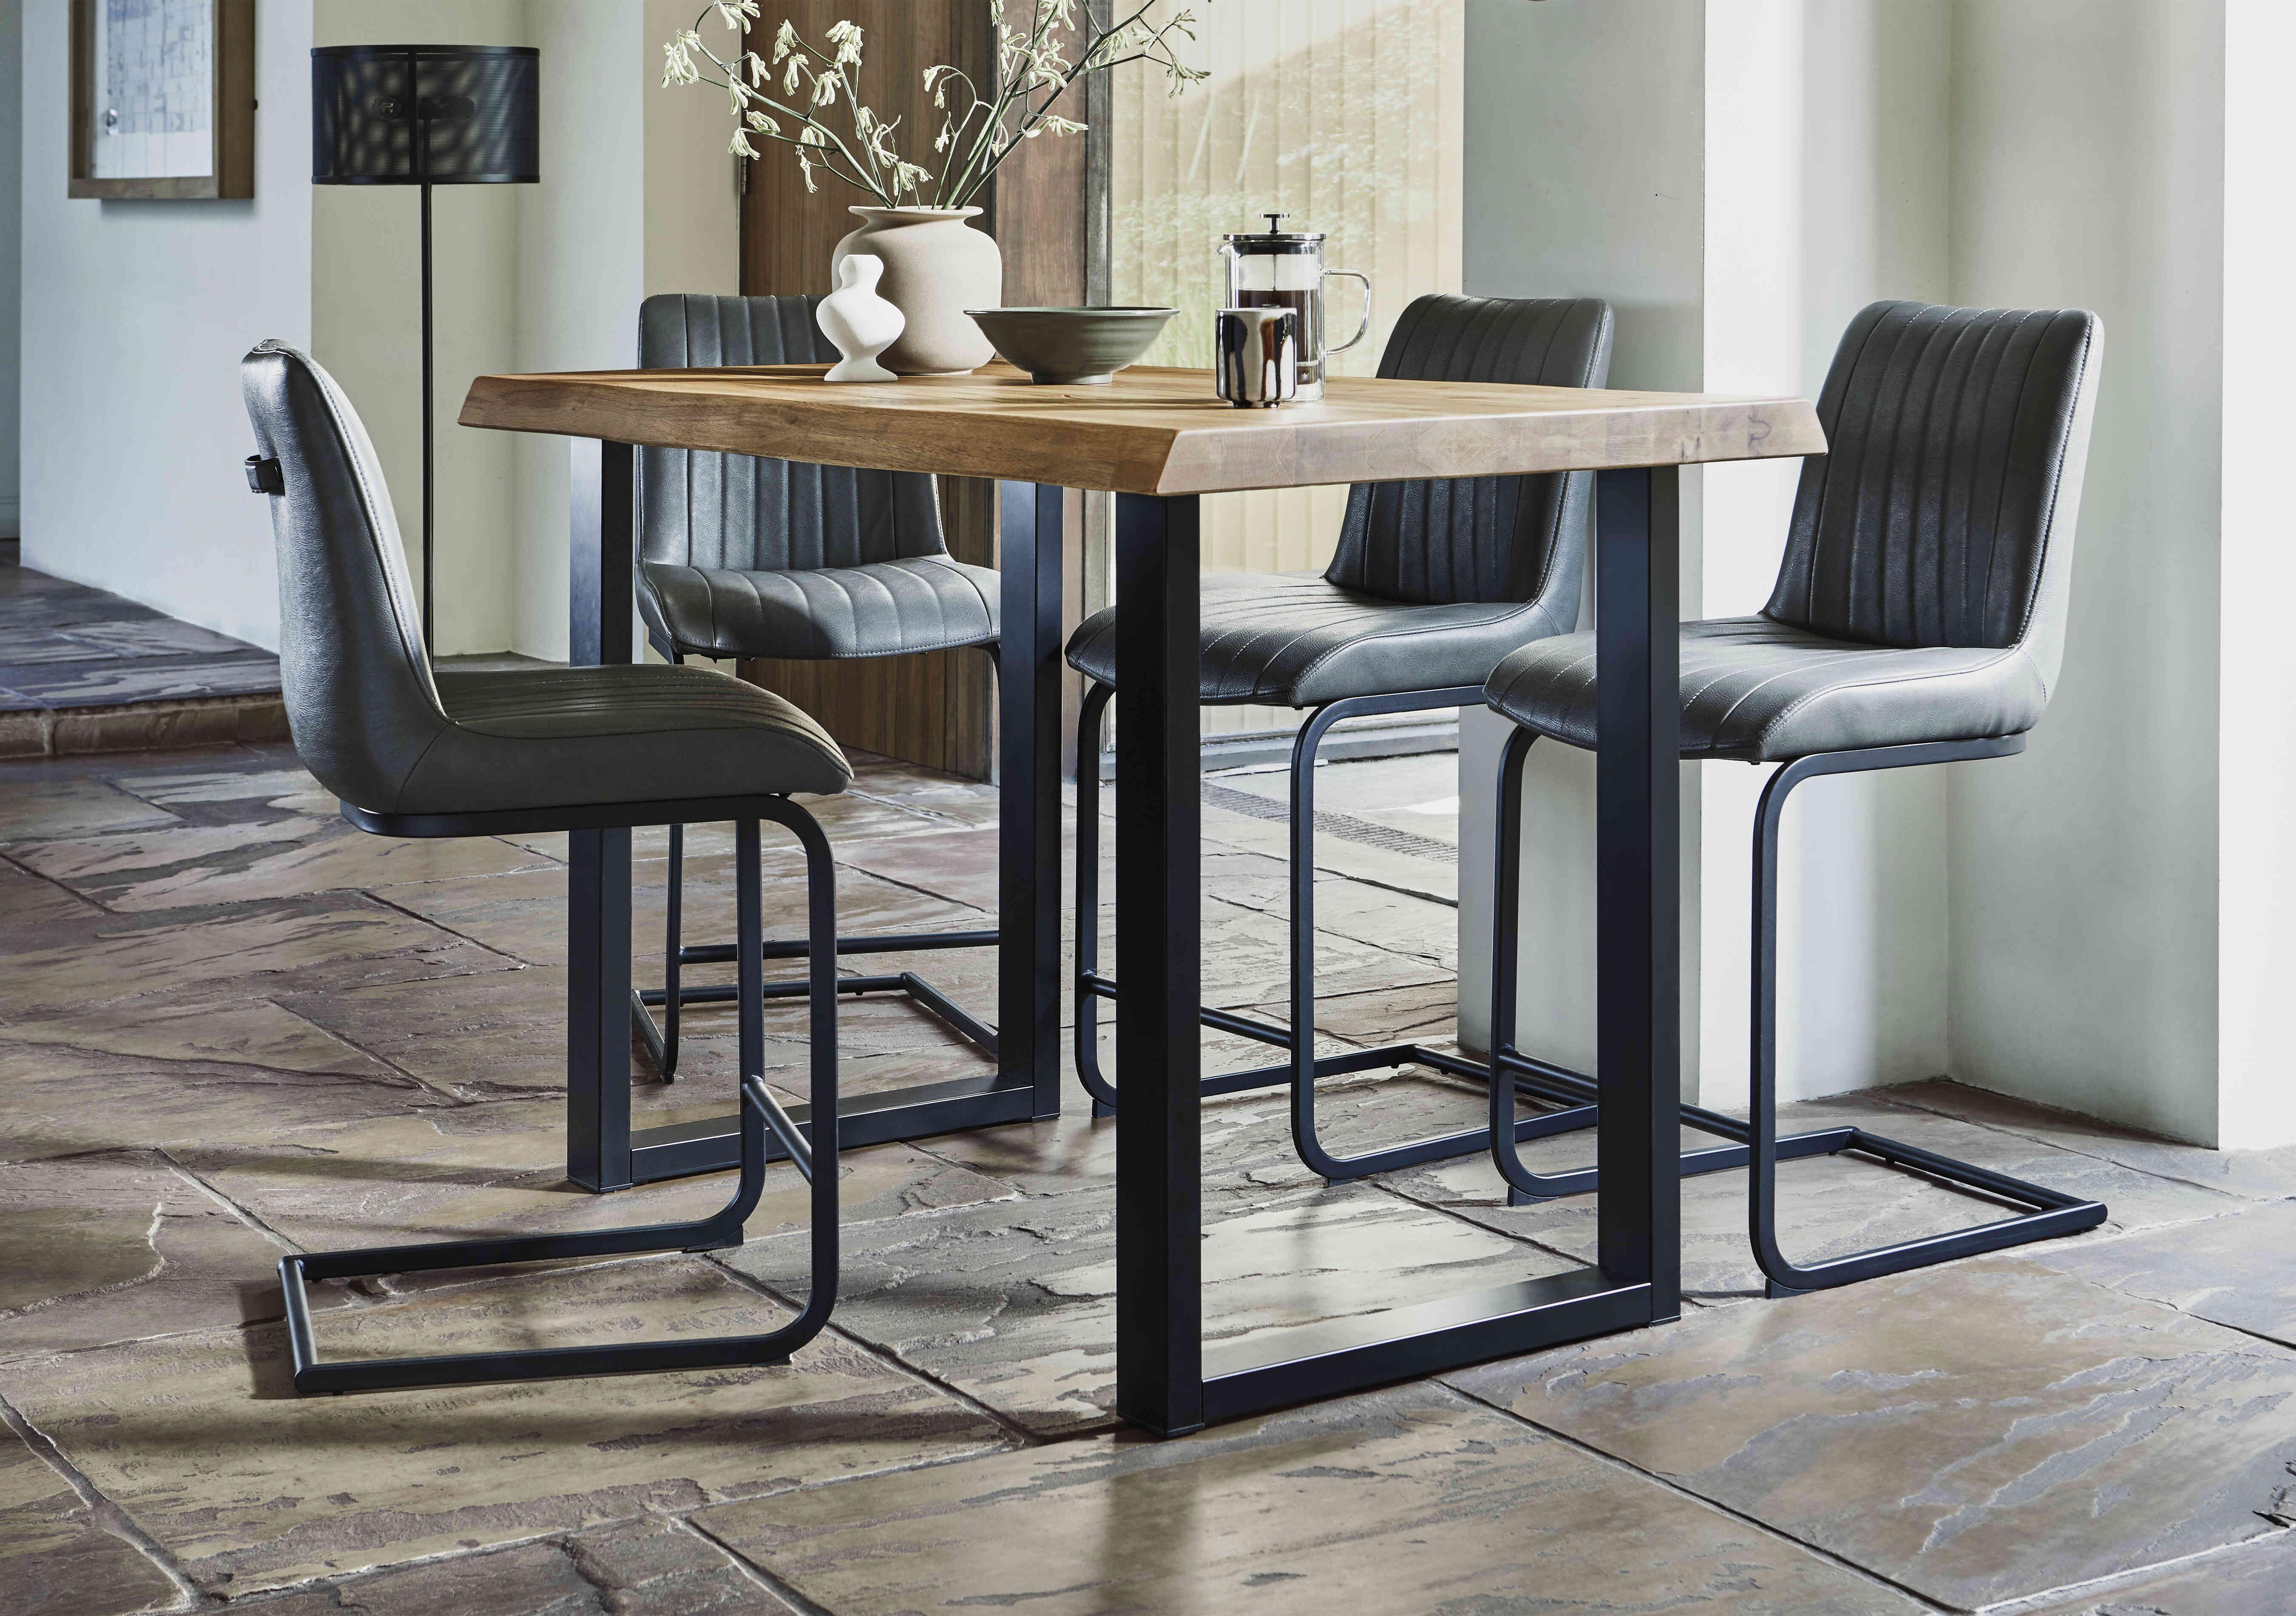 Compact Terra Raw Edge Bar Table with U-Shaped Legs and 4 Grey Terra Bar Stools in  on Furniture Village